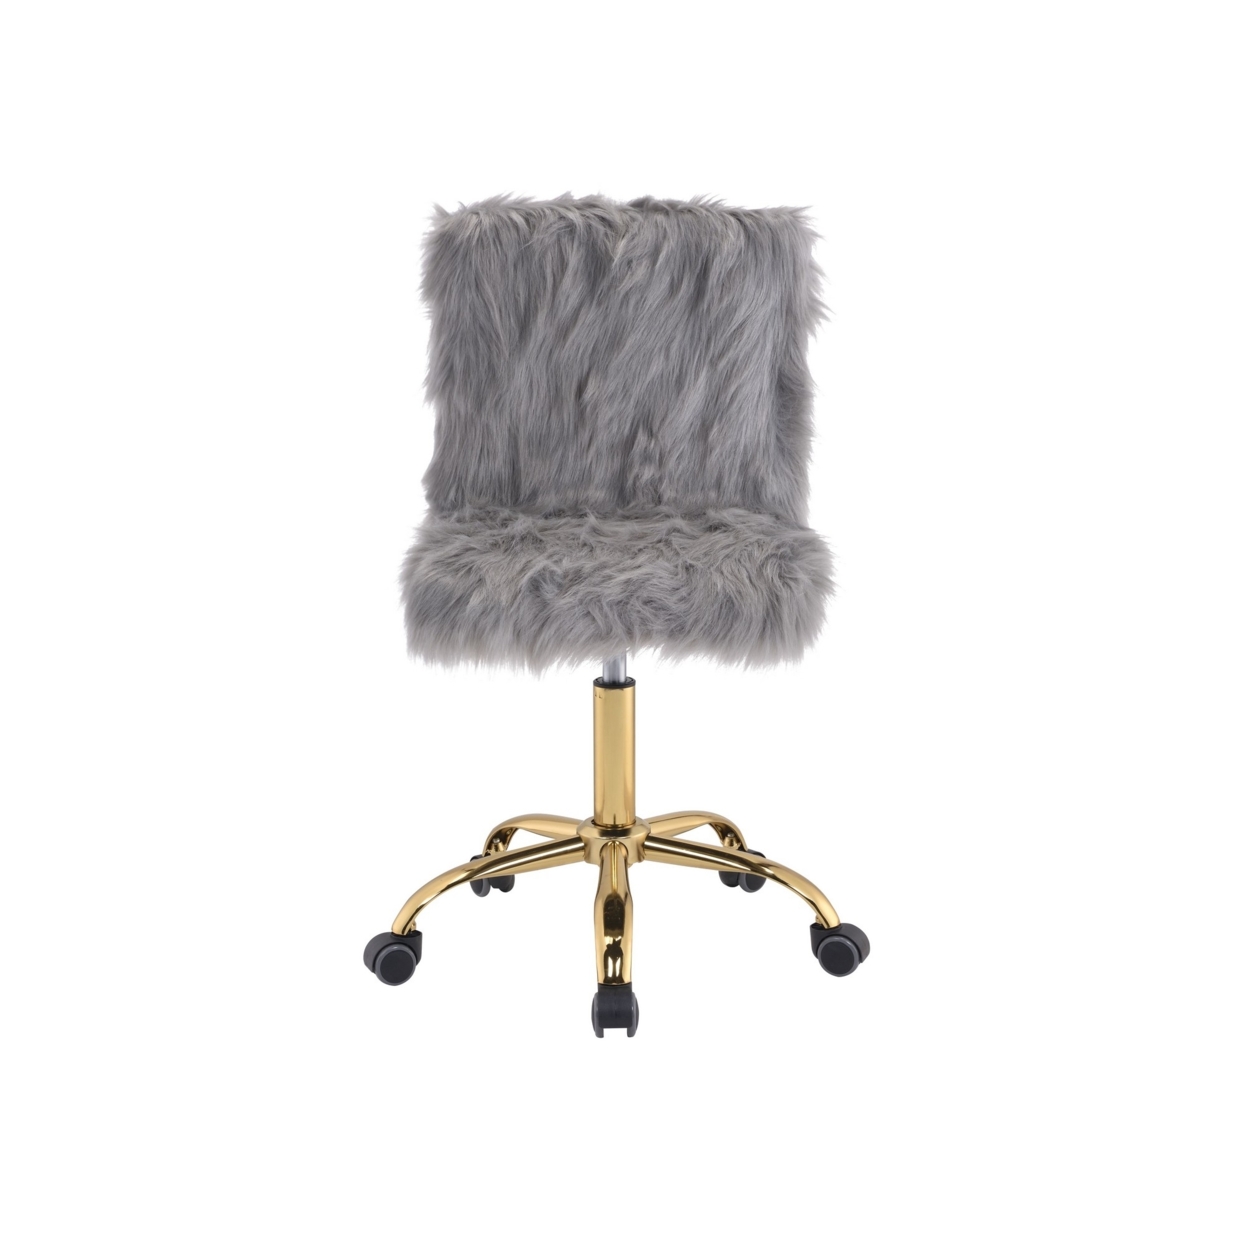 Office Chair With Faux Fur Fabric And Swivel Mechanism, Gray- Saltoro Sherpi